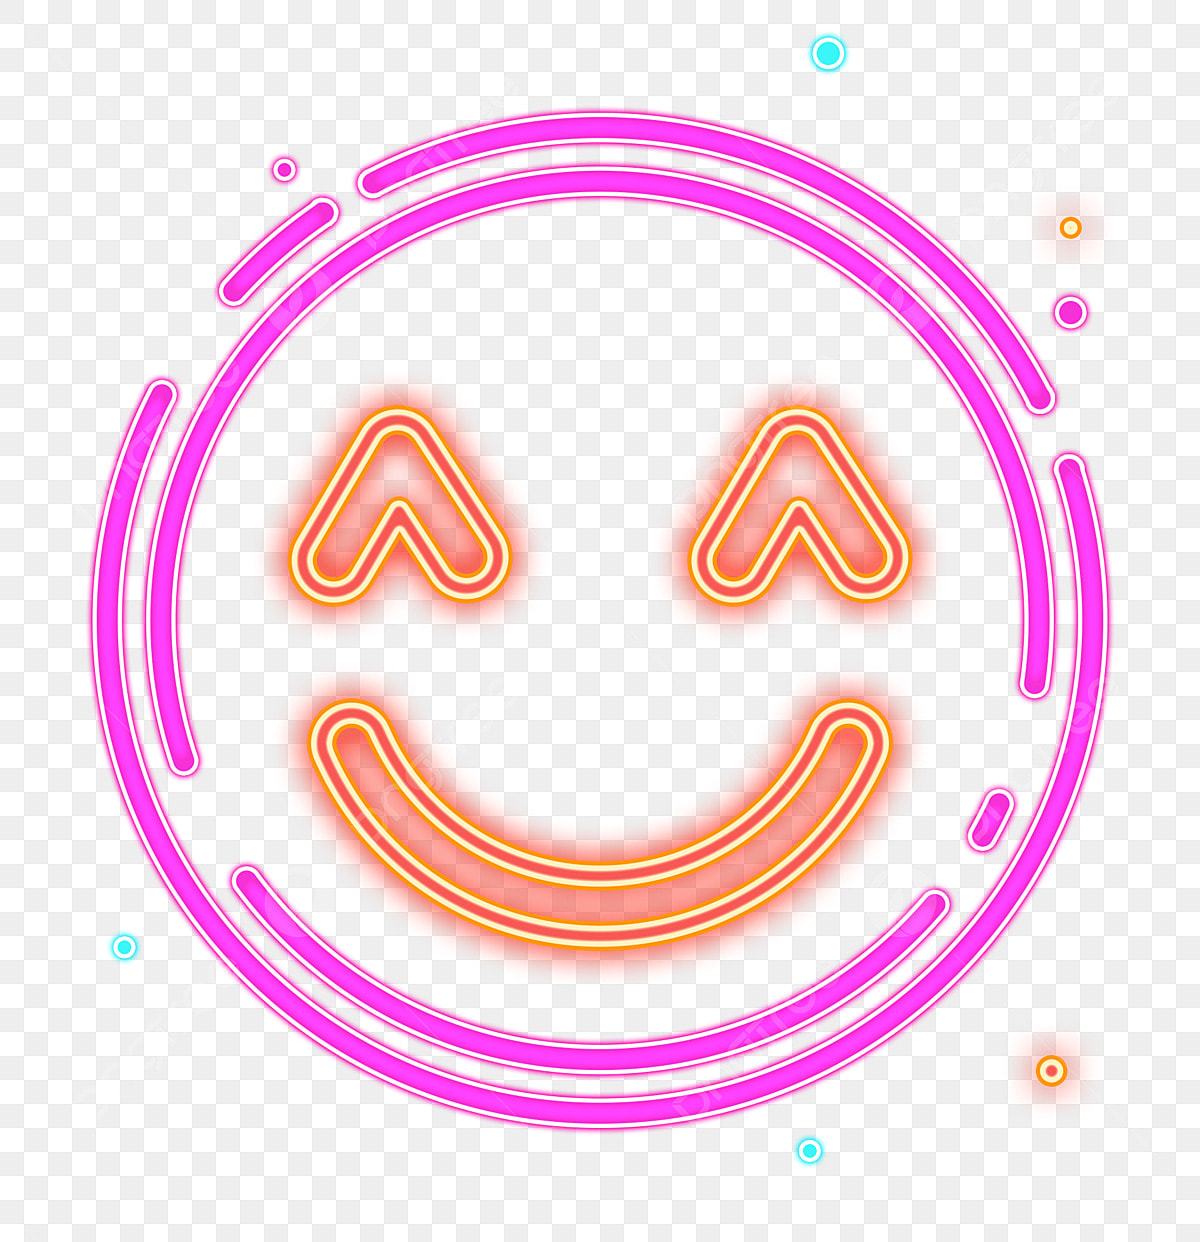 Neon Smiley PNG Transparent Image Free